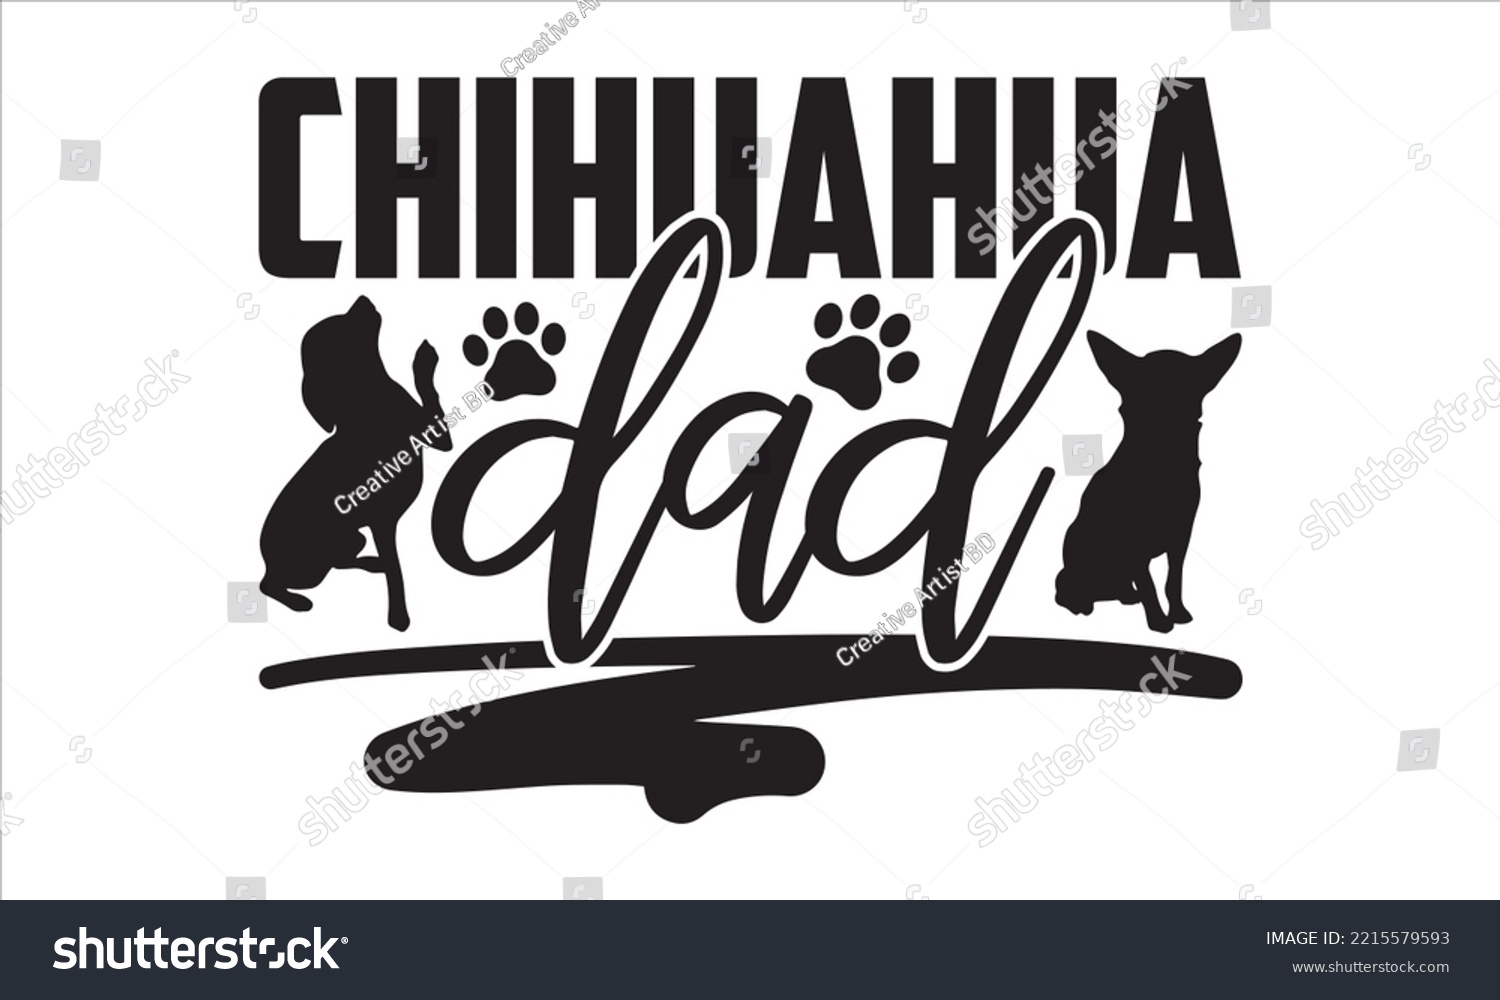 SVG of Chihuahua Dad - Chihuahua T shirt Design, Hand drawn vintage illustration with hand-lettering and decoration elements, Cut Files for Cricut Svg, Digital Download svg